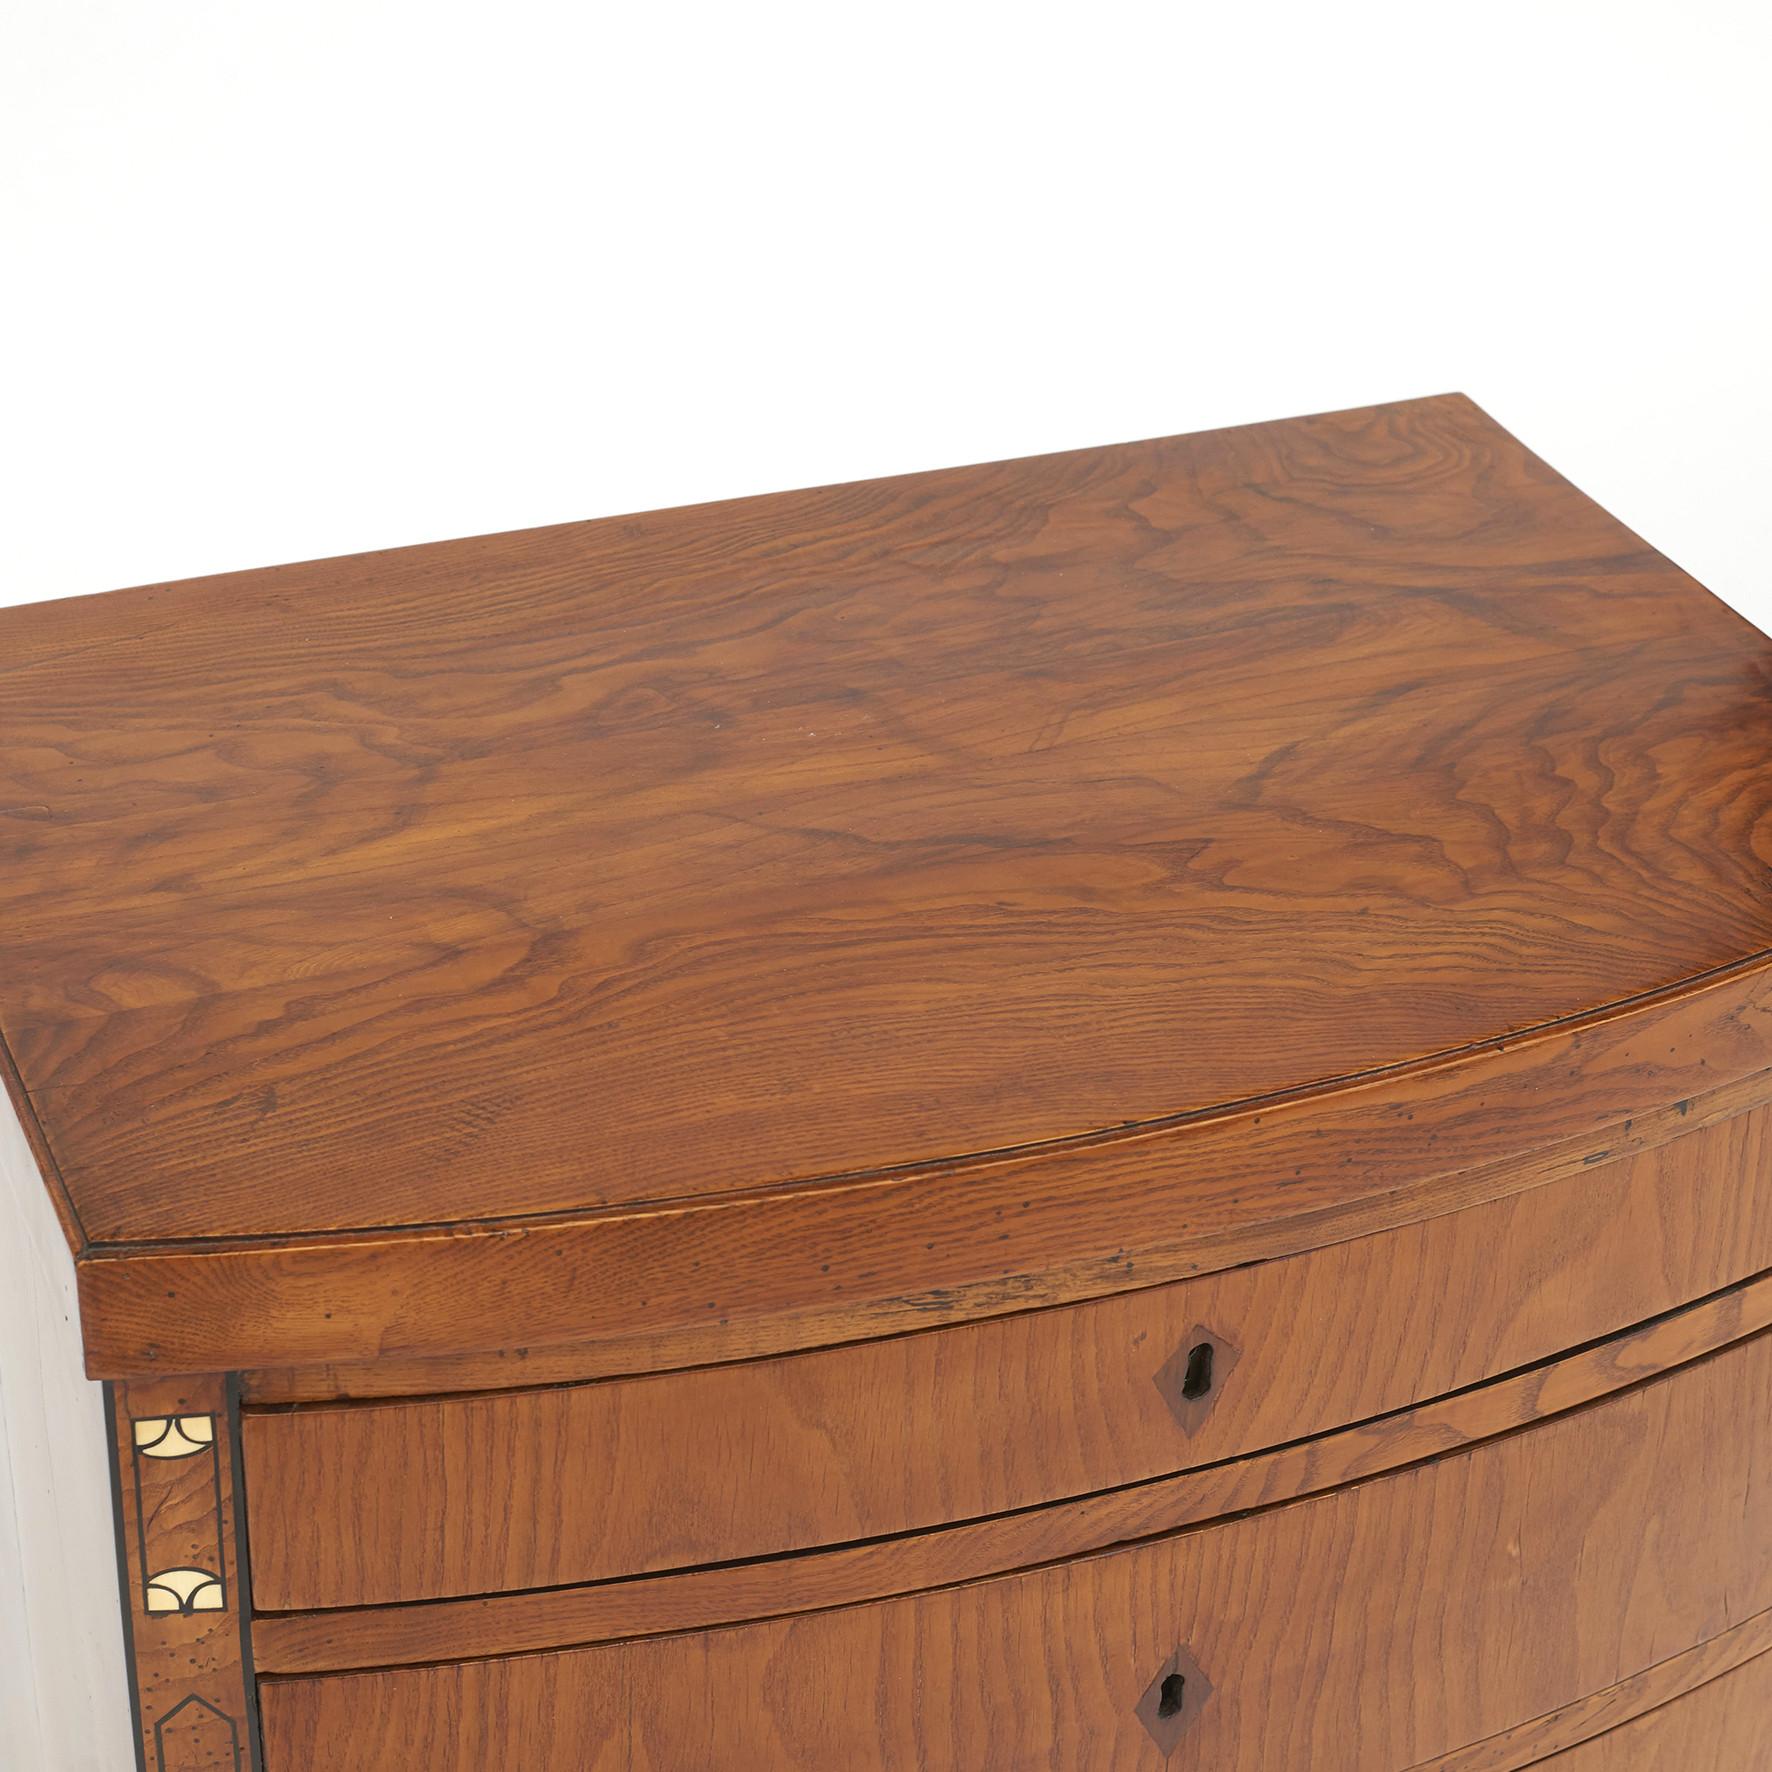 Early 19th Century Danish Empire Chest of Drawers with Curved Front, circa 1810